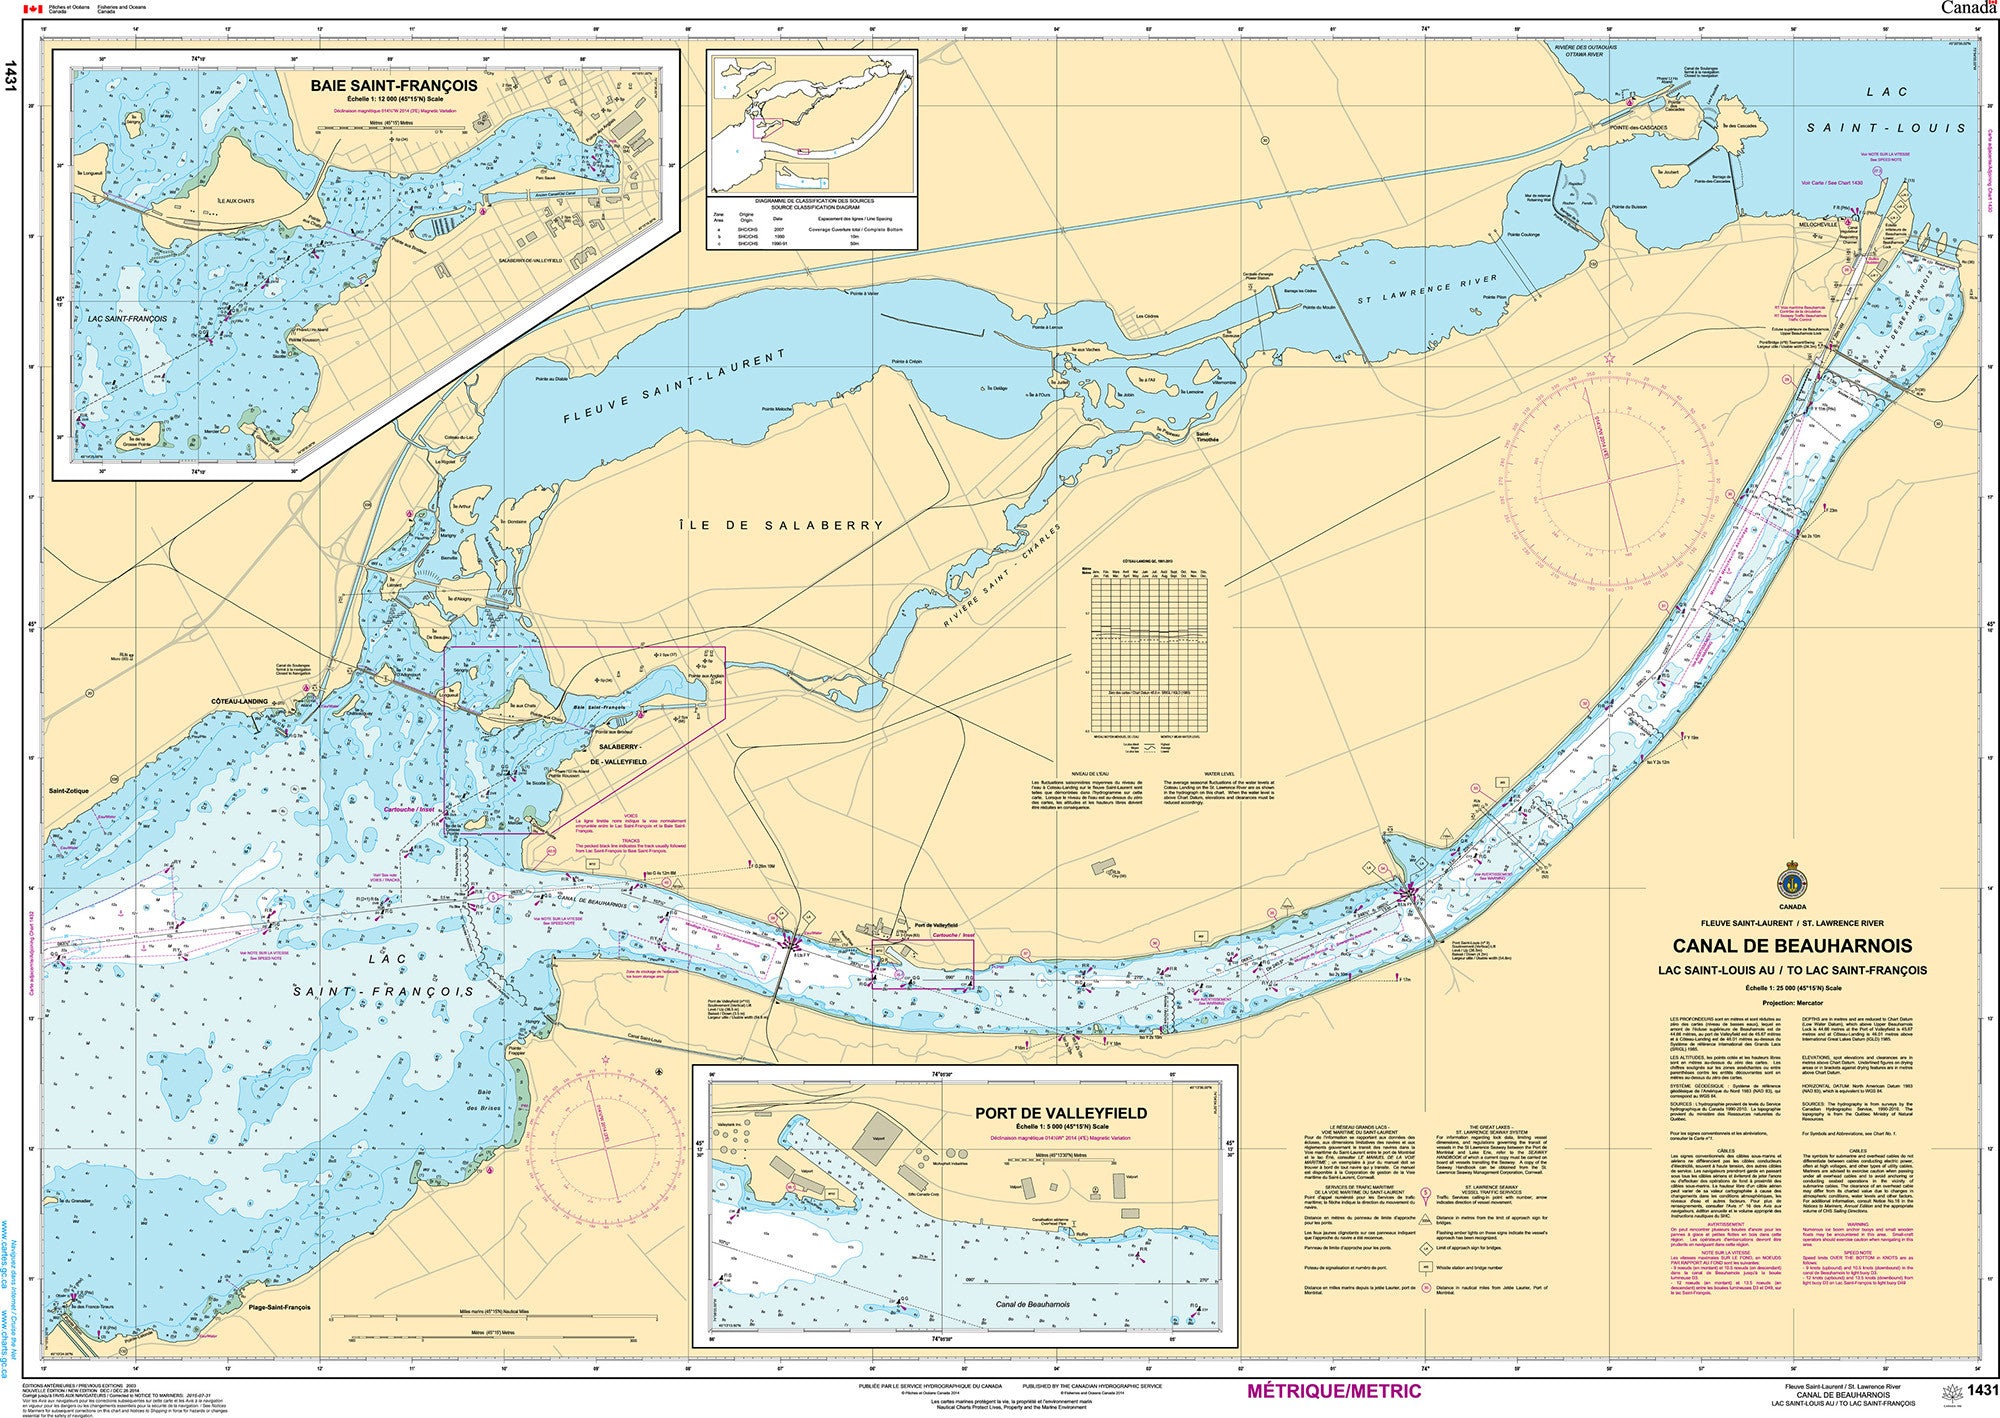 Canadian Hydrographic Service Nautical Chart CHS1431: Canal de Beauharnois